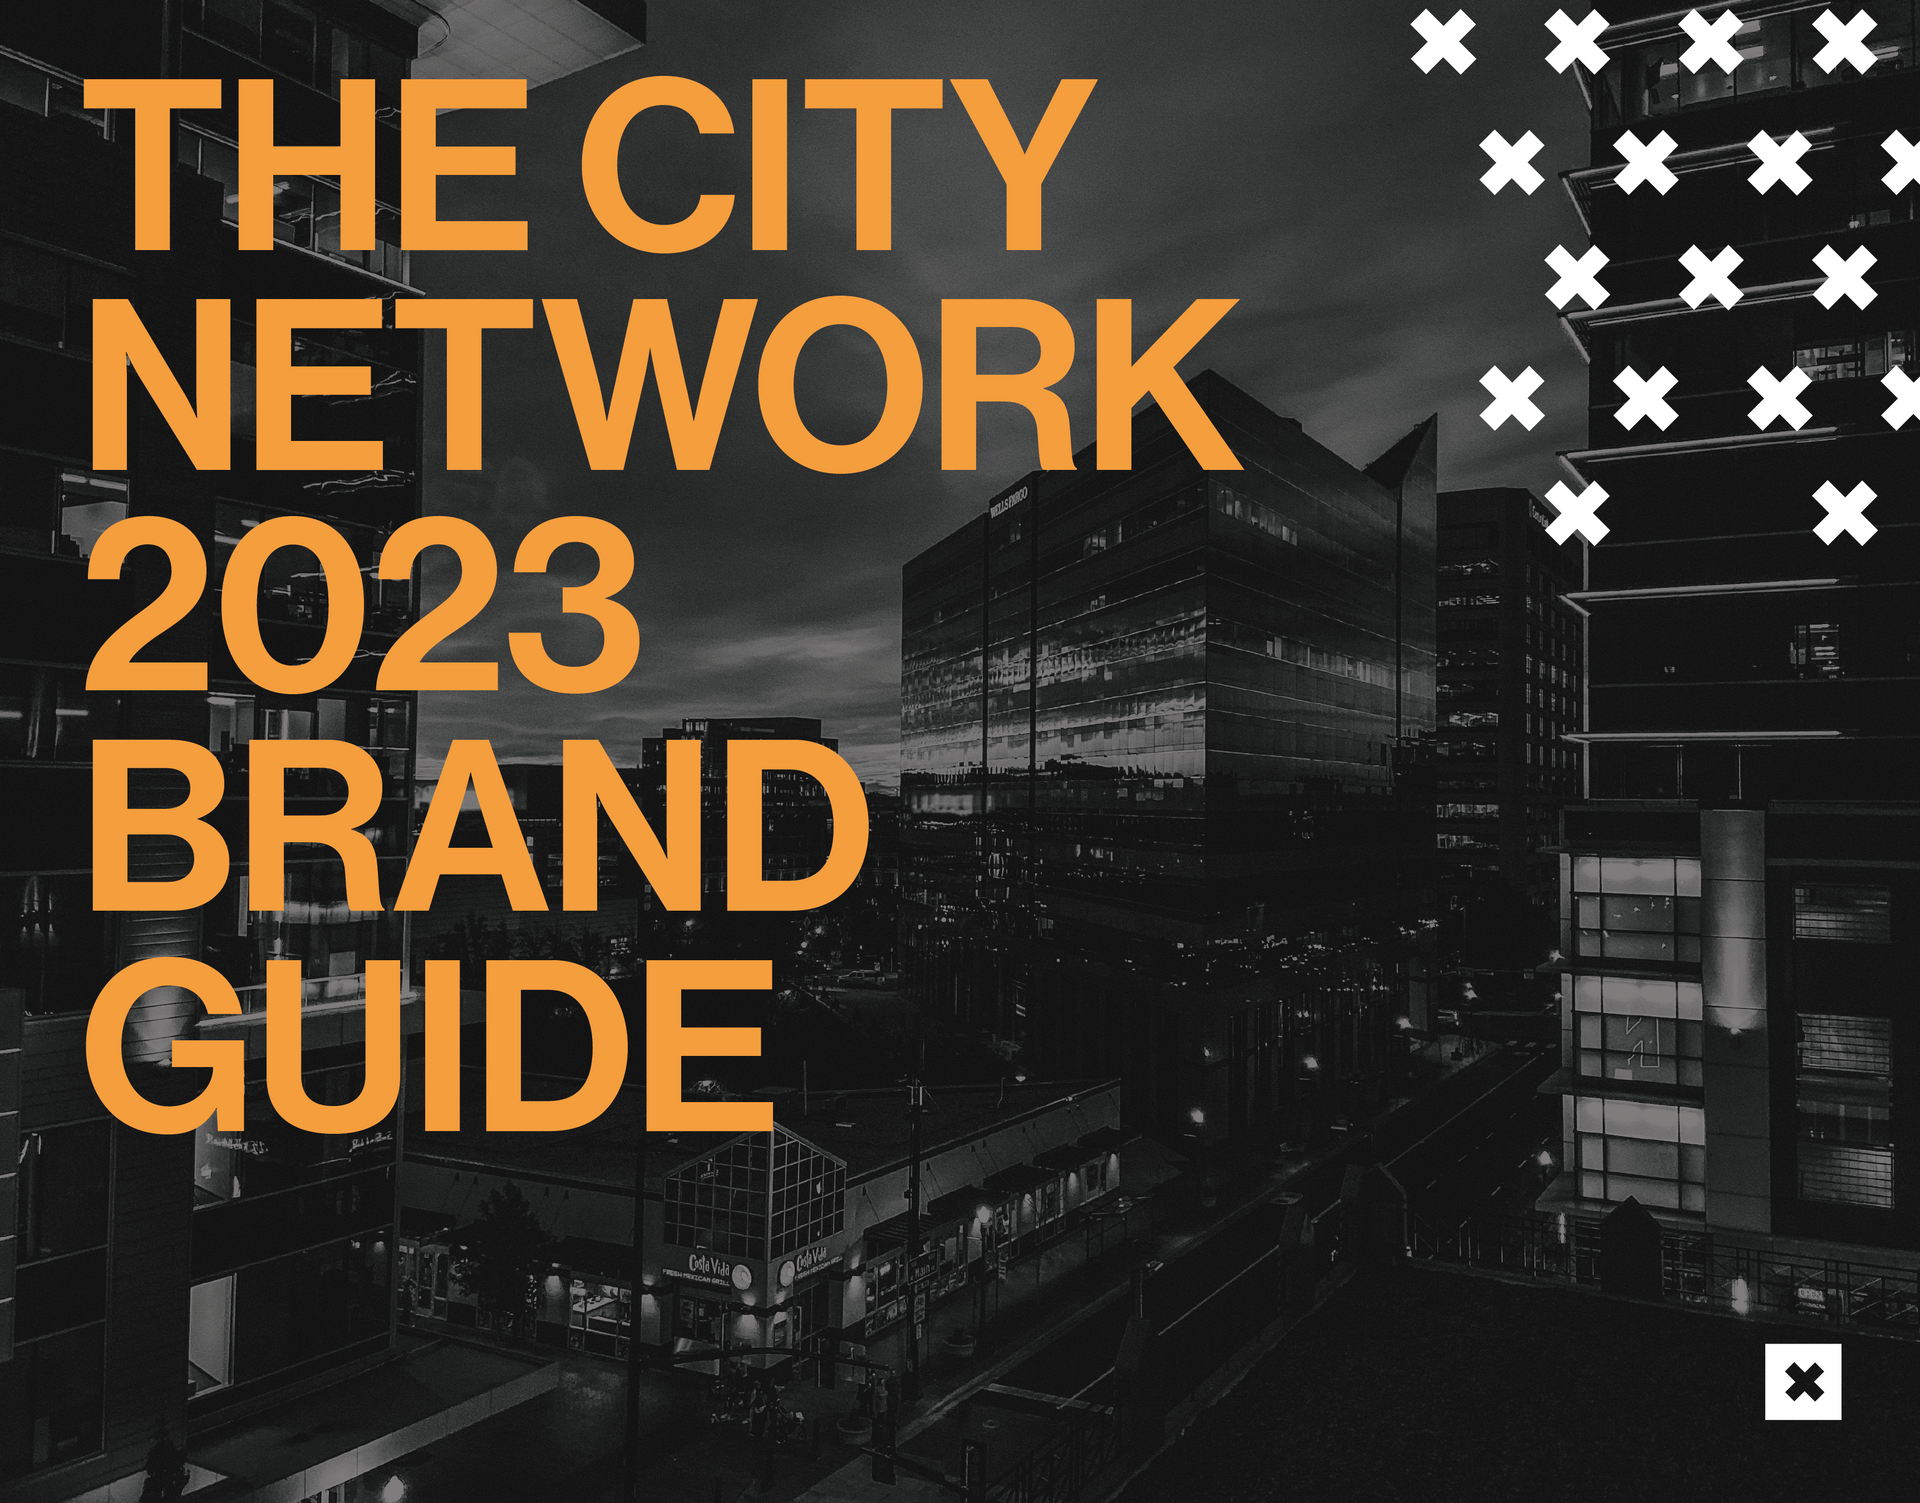 An advertisement for the city network 2023 brand guide